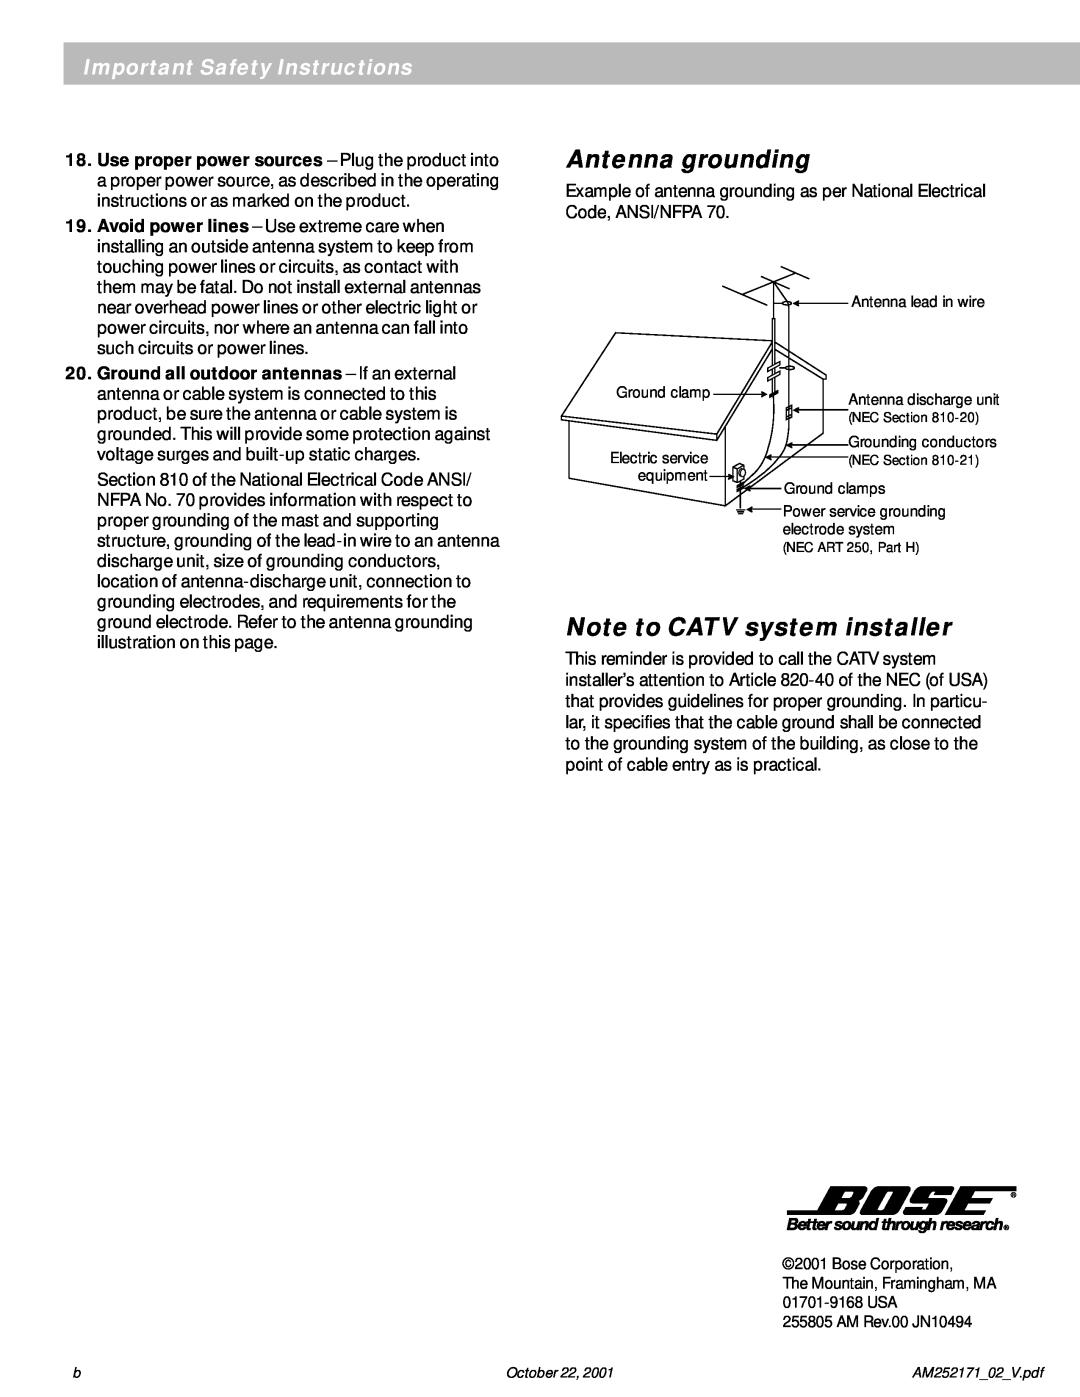 Bose 3 Series manual Antenna grounding, Note to CATV system installer, Important Safety Instructions, Antenna lead in wire 